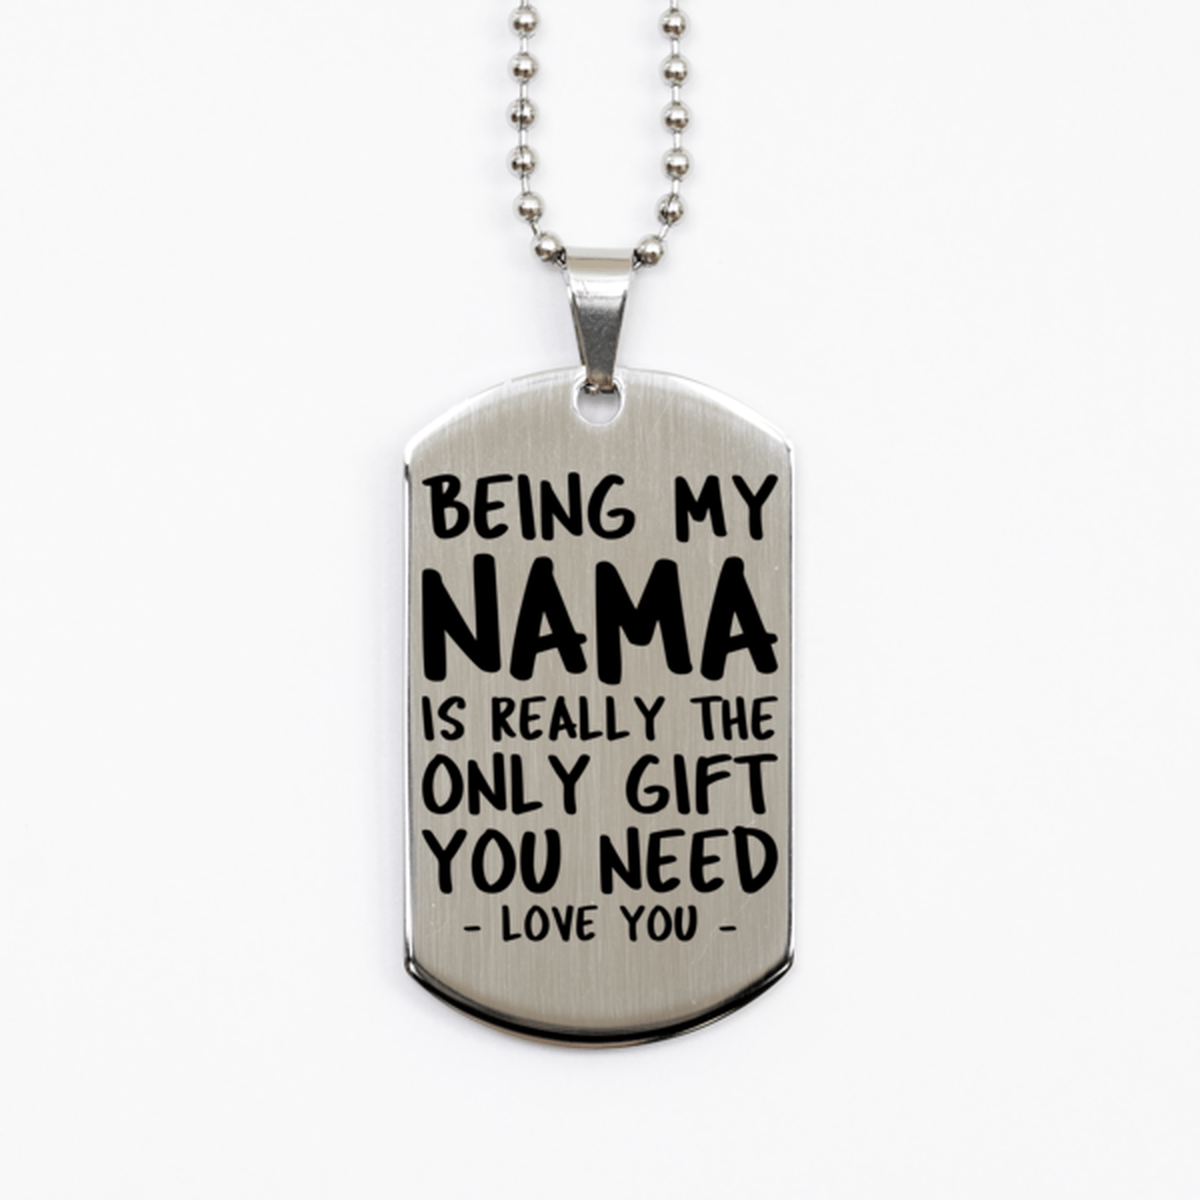 Funny Nama Silver Dog Tag Necklace, Being My Nama Is Really the Only Gift You Need, Best Birthday Gifts for Nama